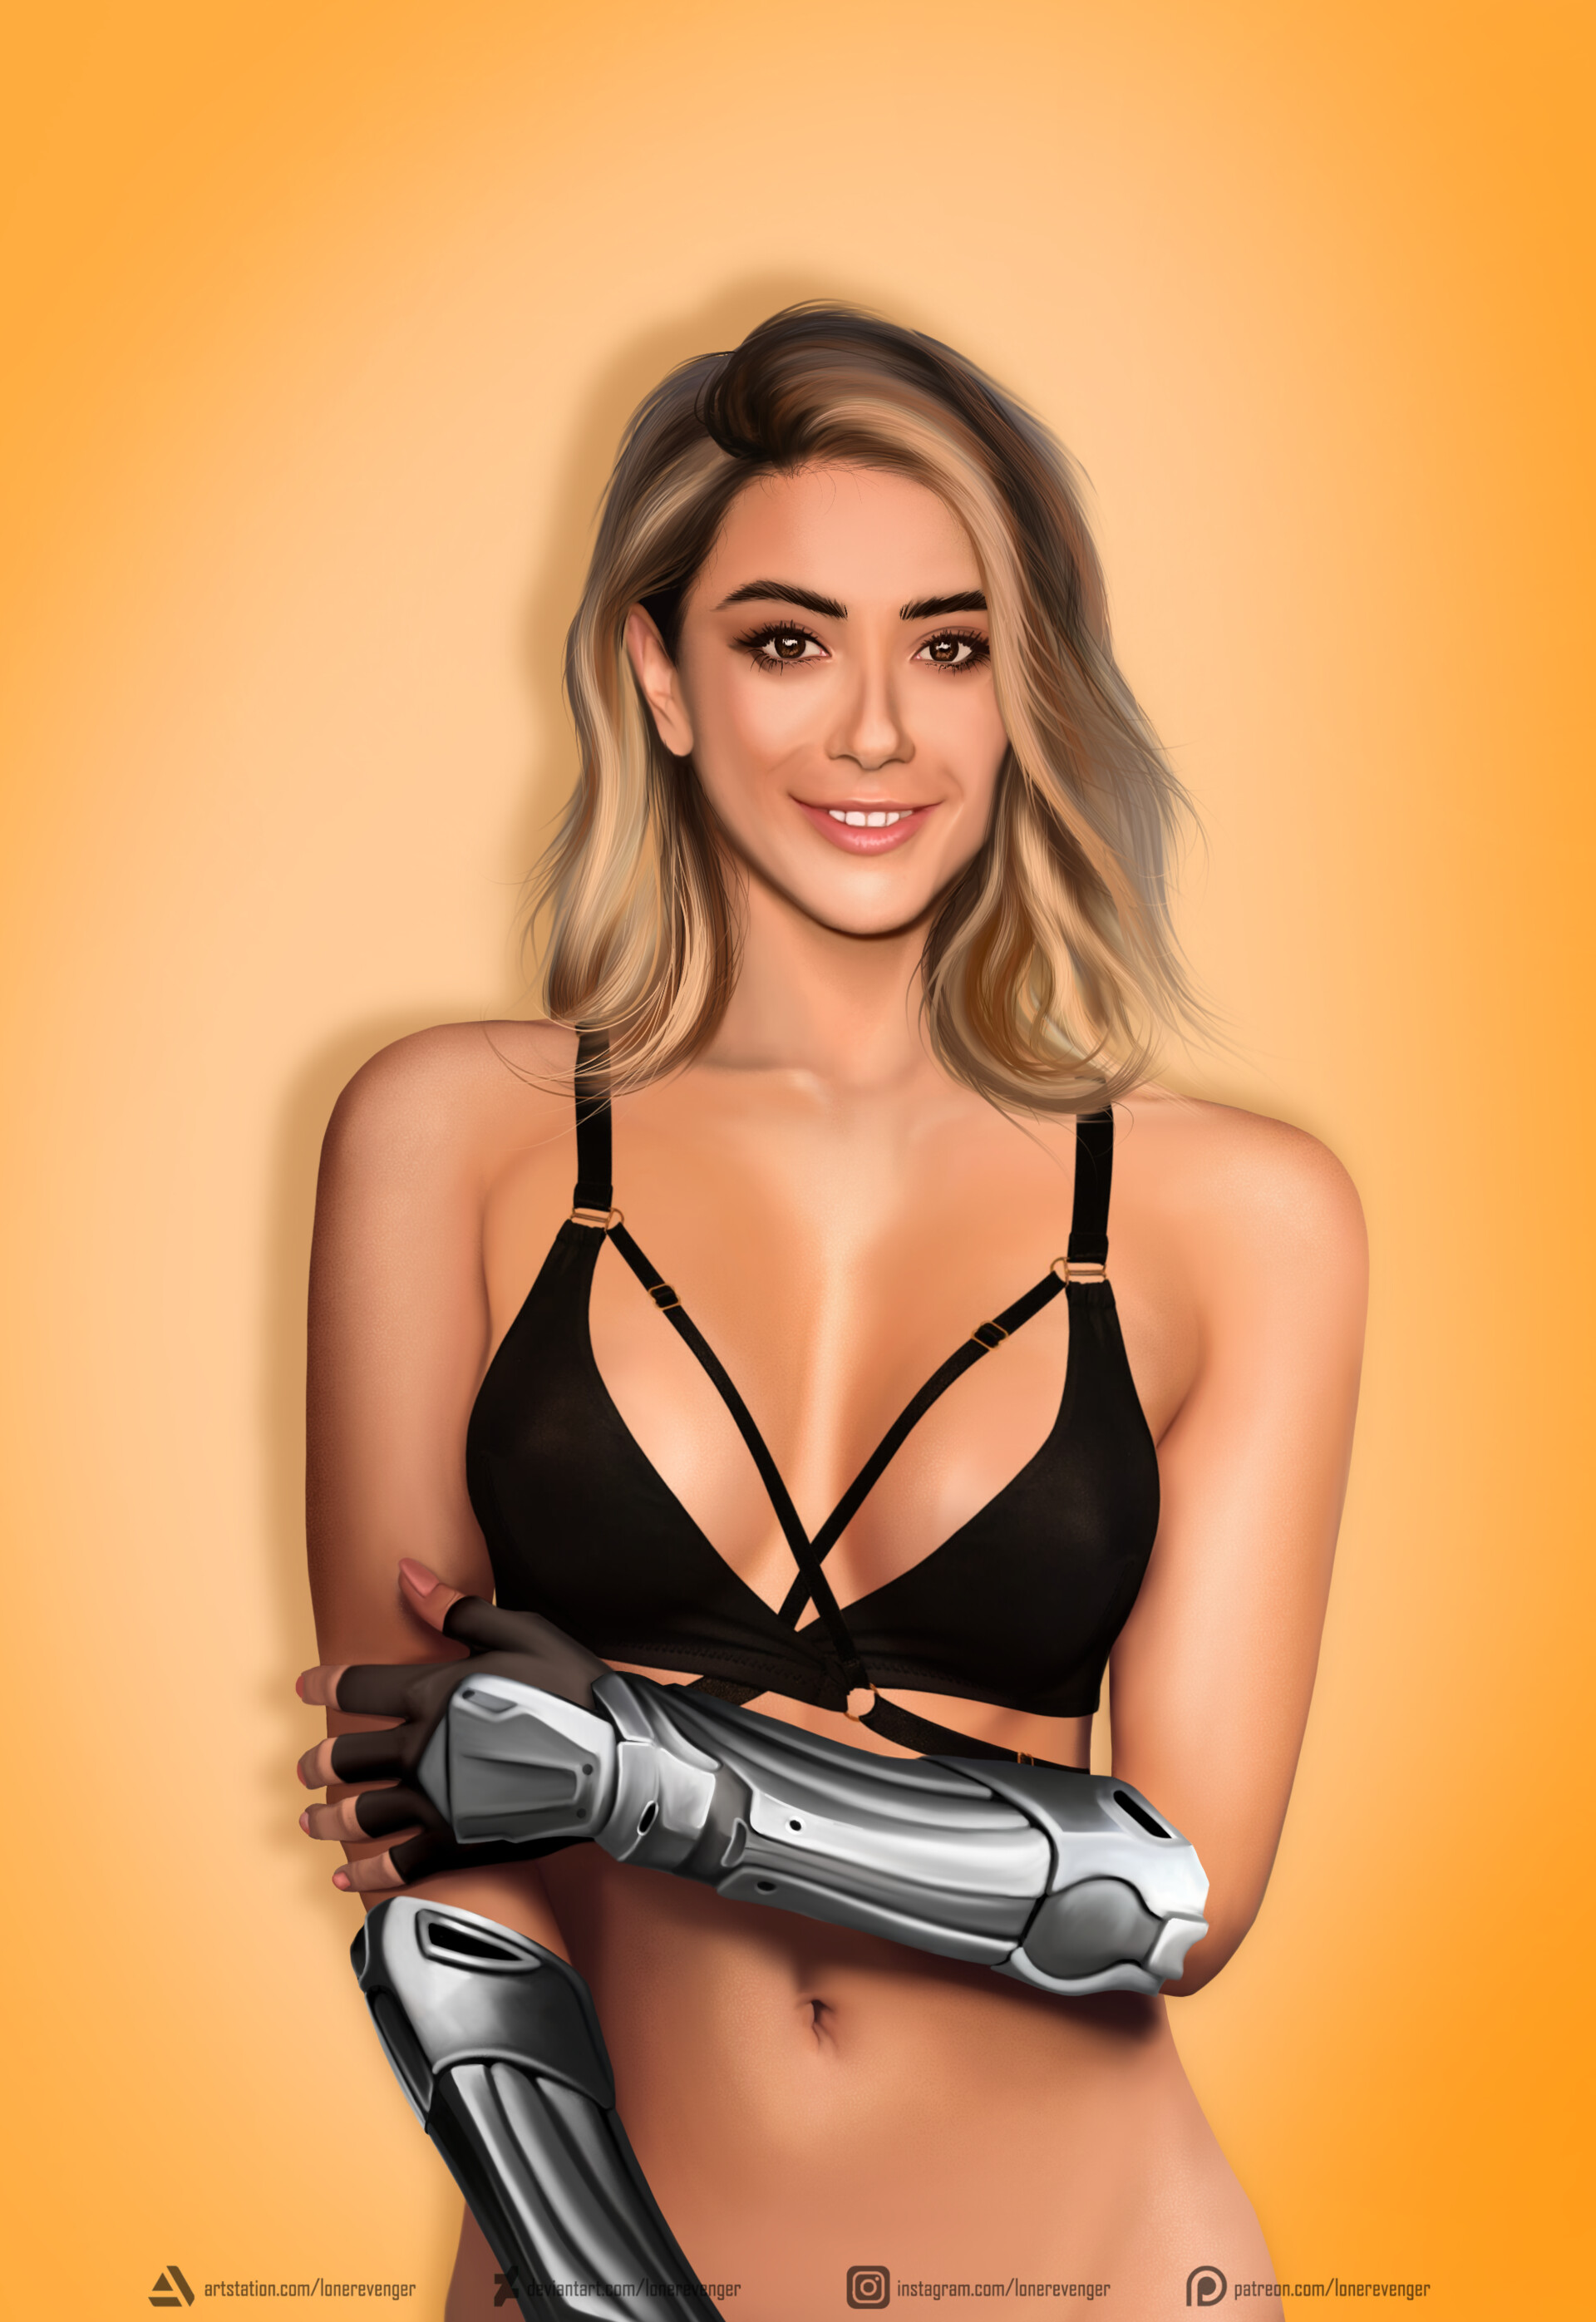 A commission artwork of Chloe Bennet played as Daisy Johnson in Agents of S...